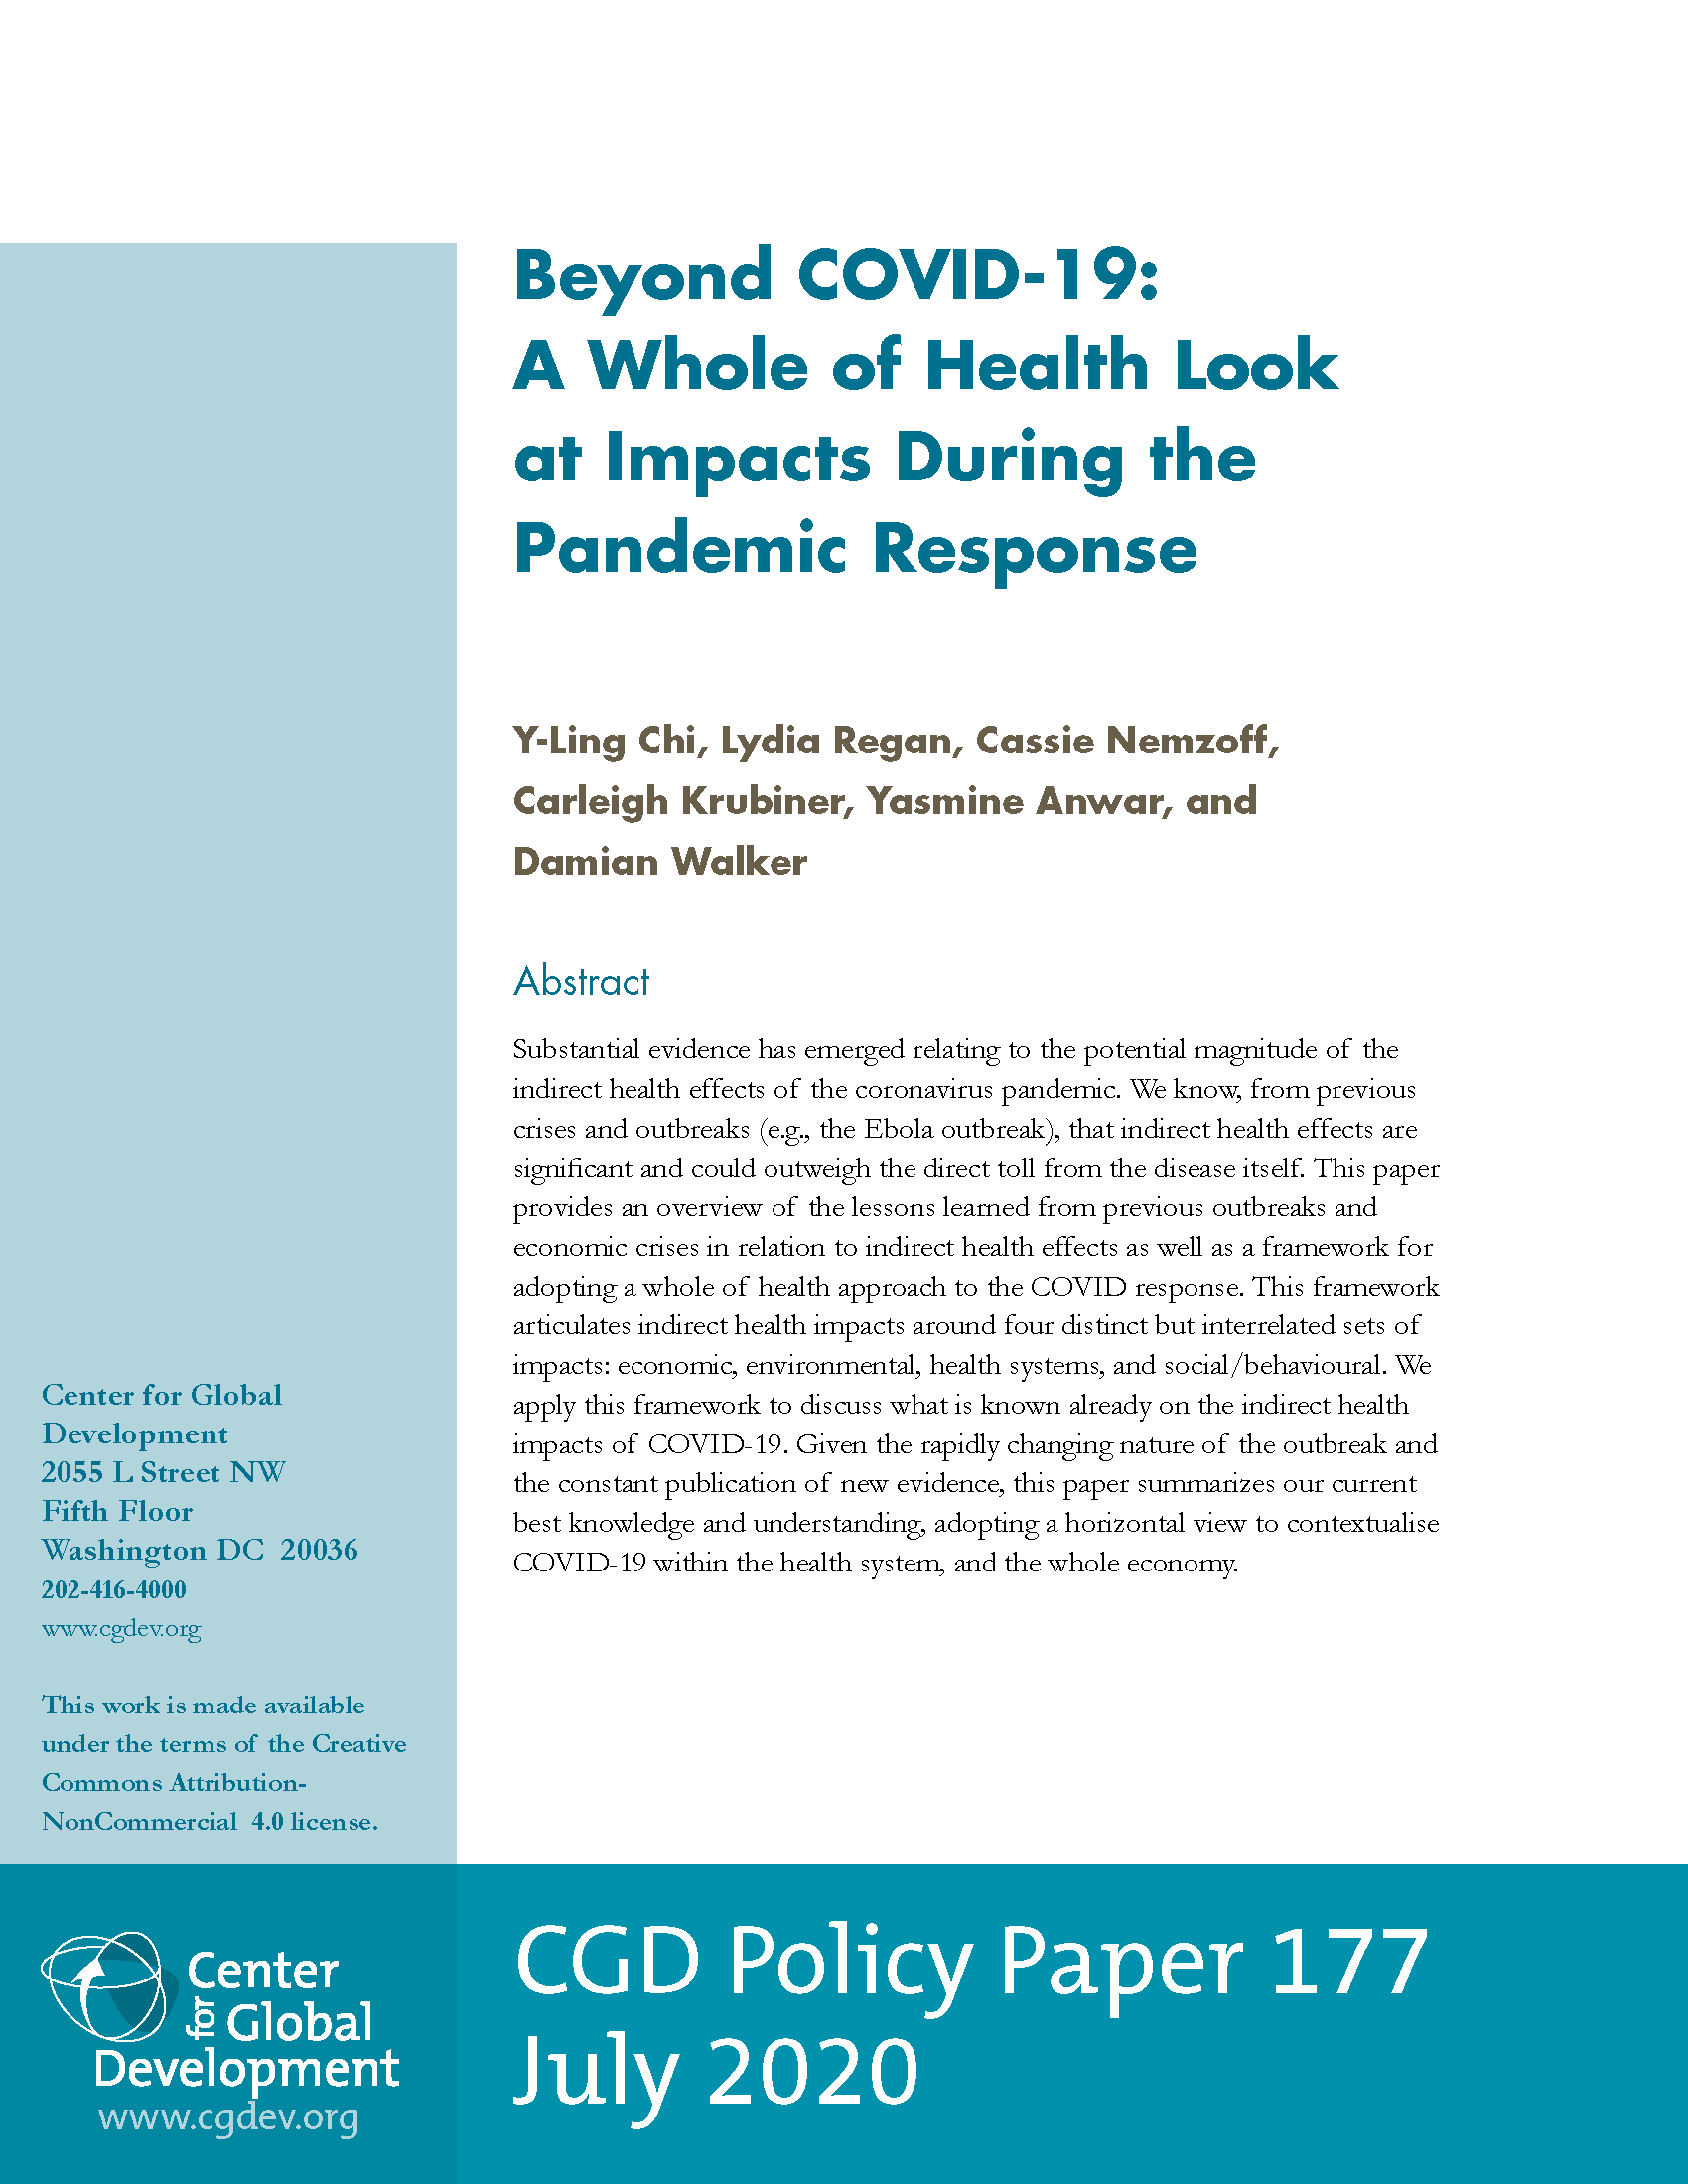 thesis proposal about pandemic